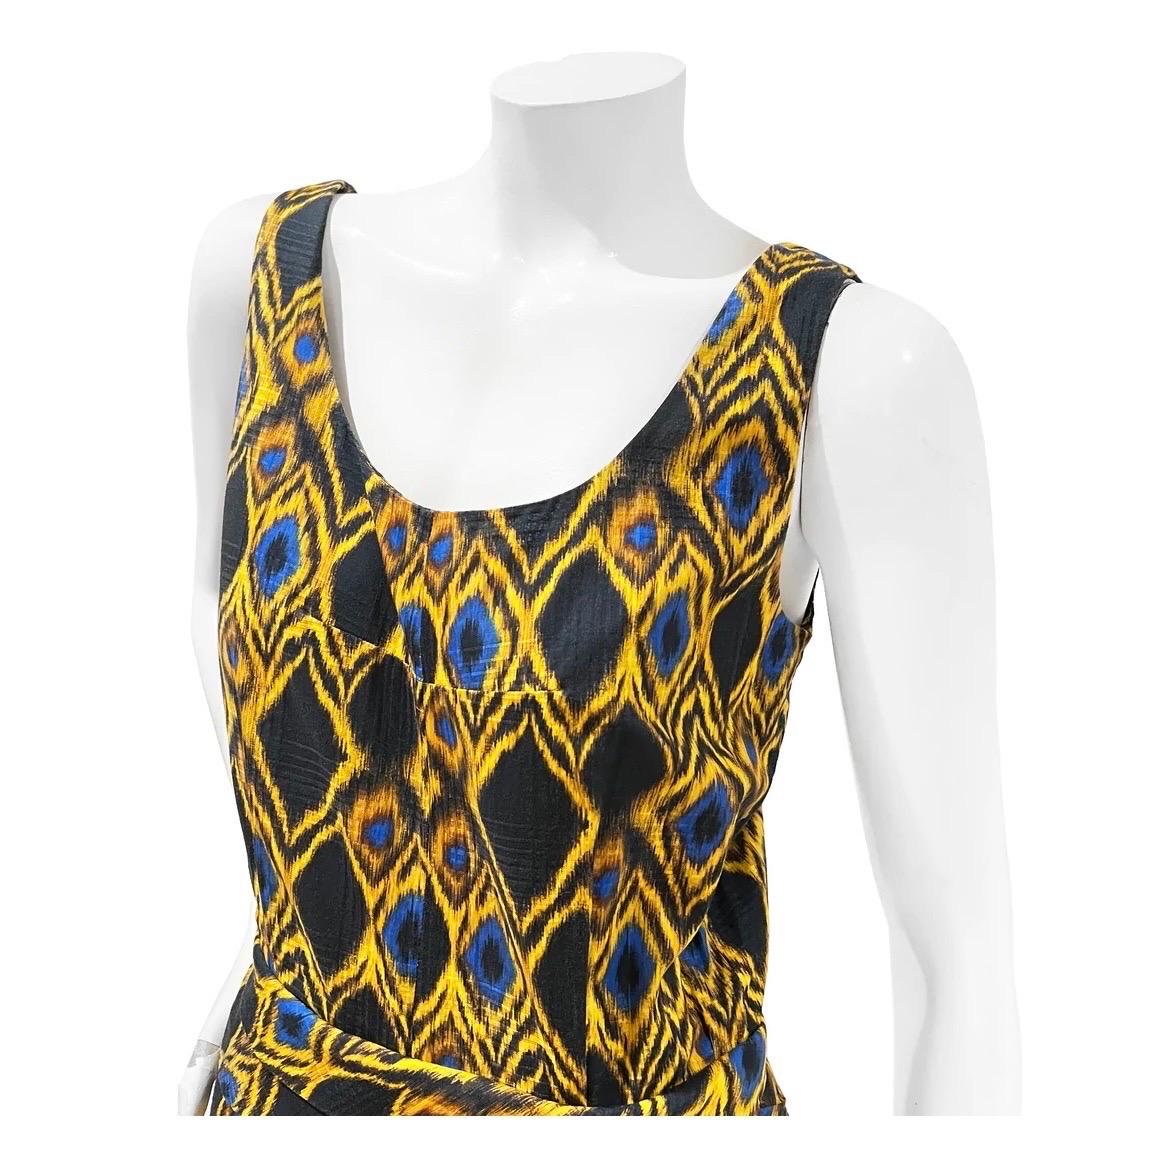 Abstract Print Dress by Balenciaga
Circa 2009
Made in France
Black with yellow/blue abstract print design
Sleeveless  
Invisible back zip closure
Pleated detail on skirt
Scoop neckline
Layered fabric belt detail
Belt has multi clasp closure in